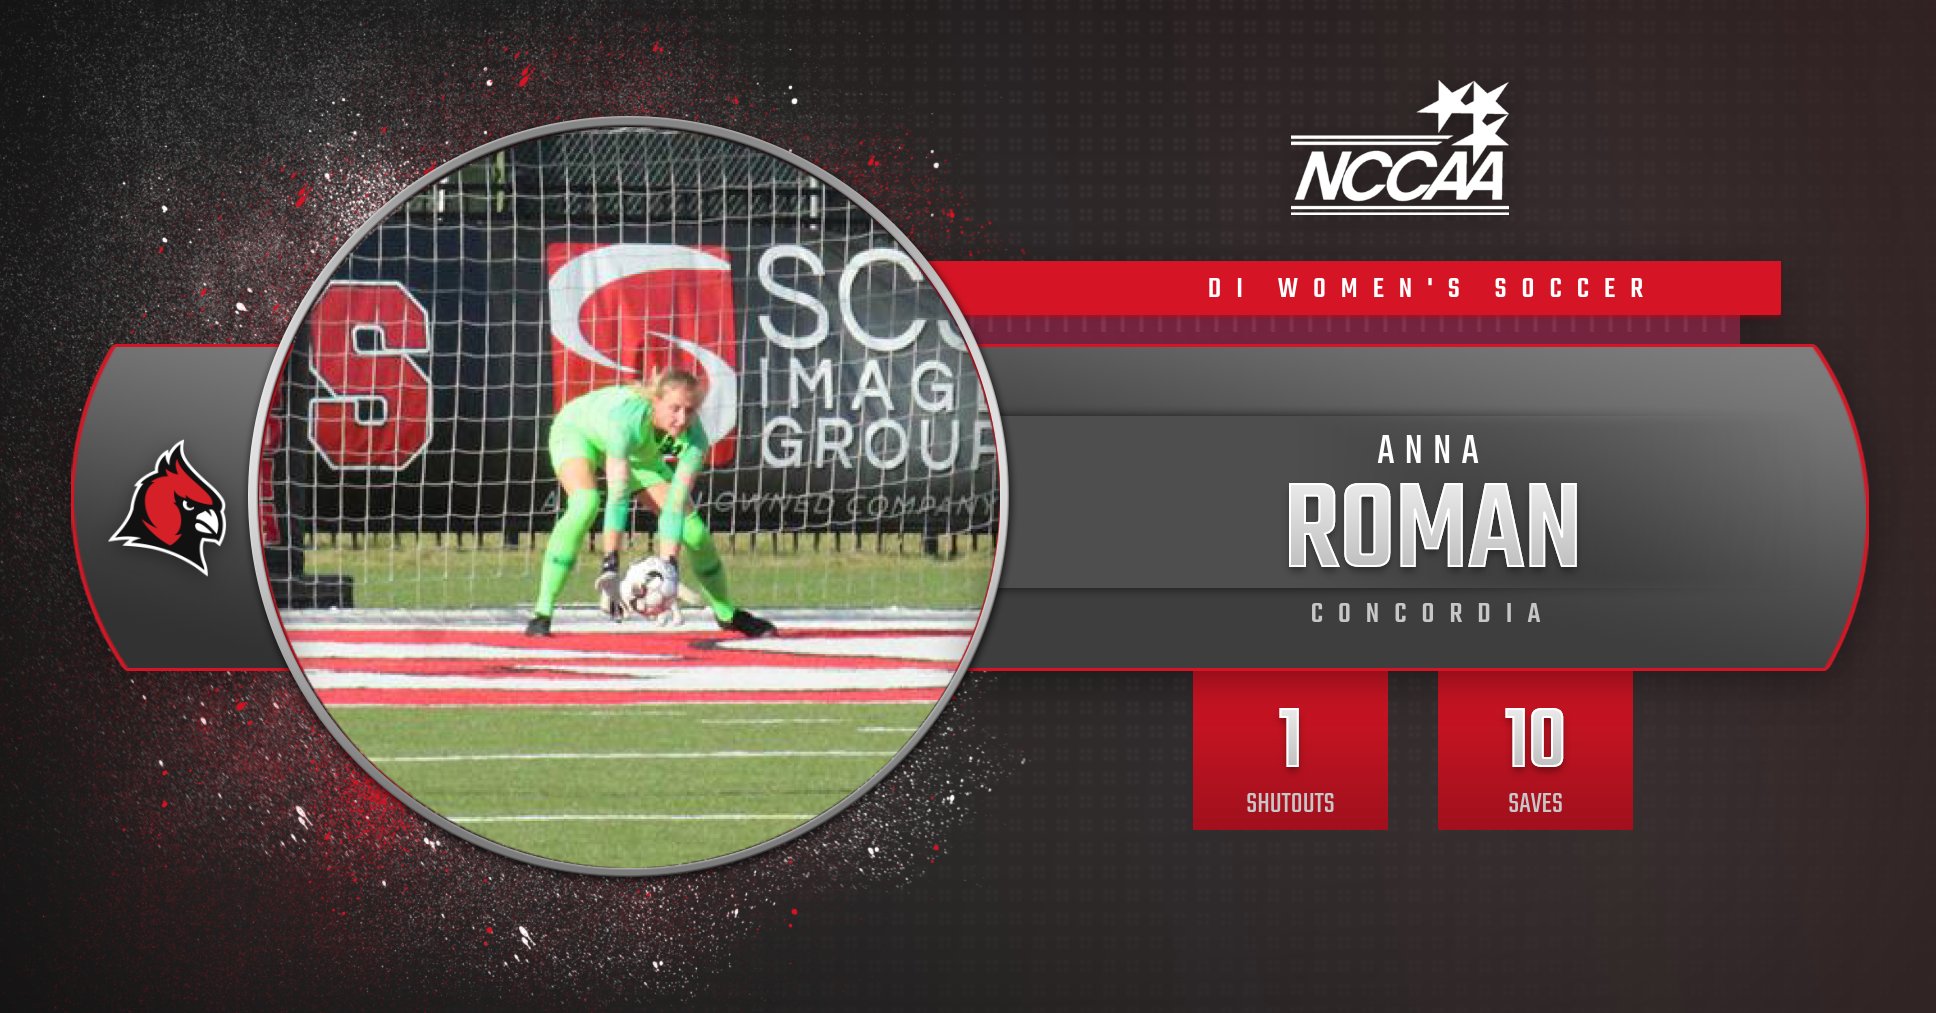 Anna Roman named NCCAA Defensive Player of the Week